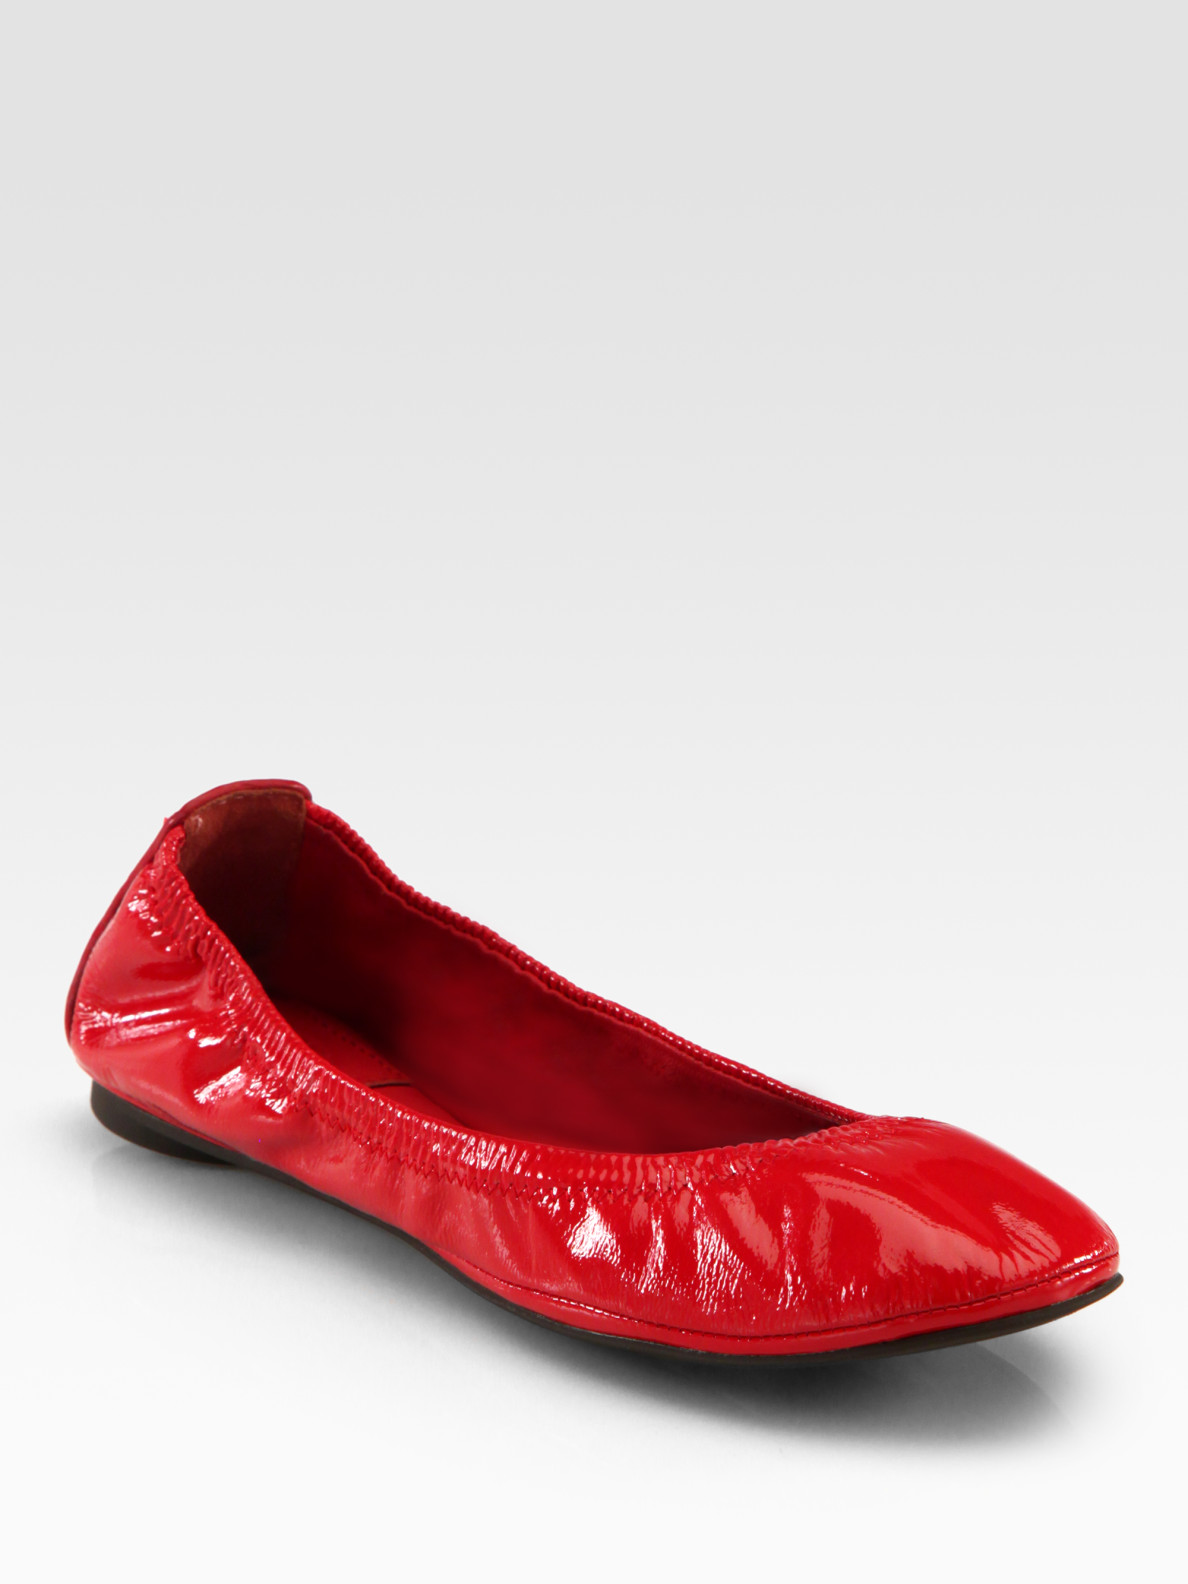 Tory Burch Eddie Patent Leather Ballet Flats in Red | Lyst